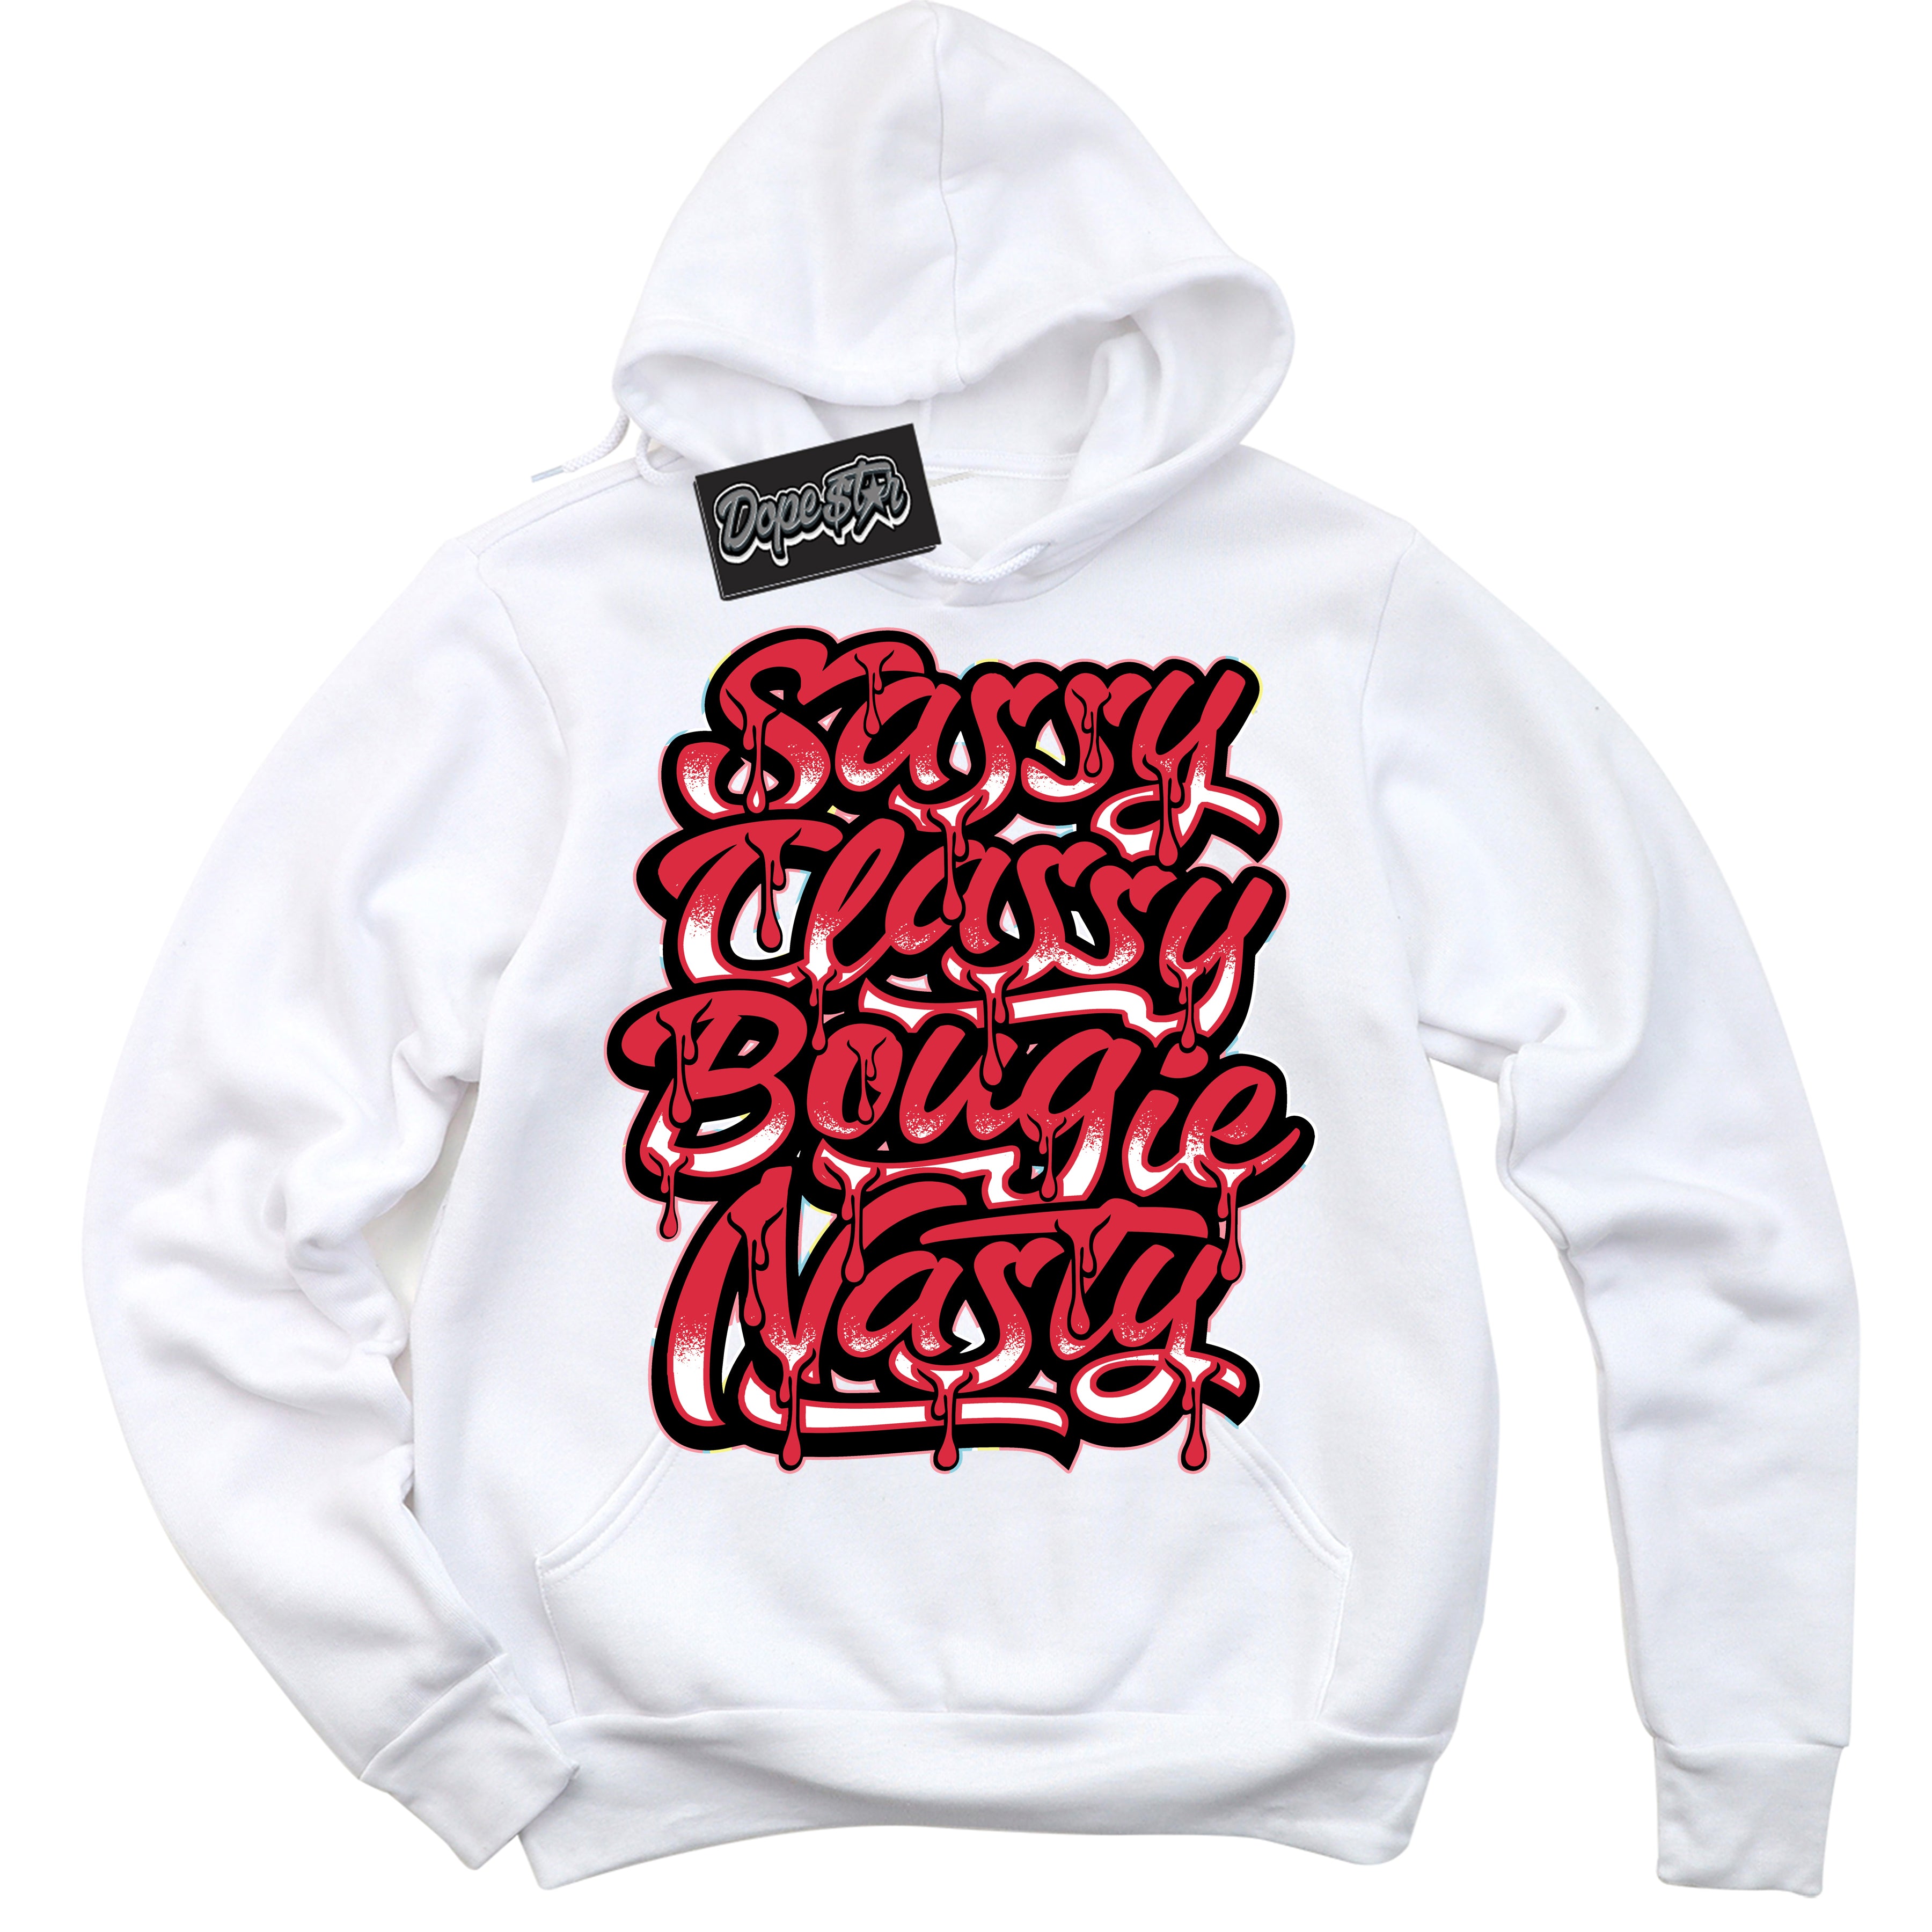 Cool White Graphic DopeStar Hoodie with “ Sassy Classy “ print, that perfectly matches Spider-Verse 1s sneakers